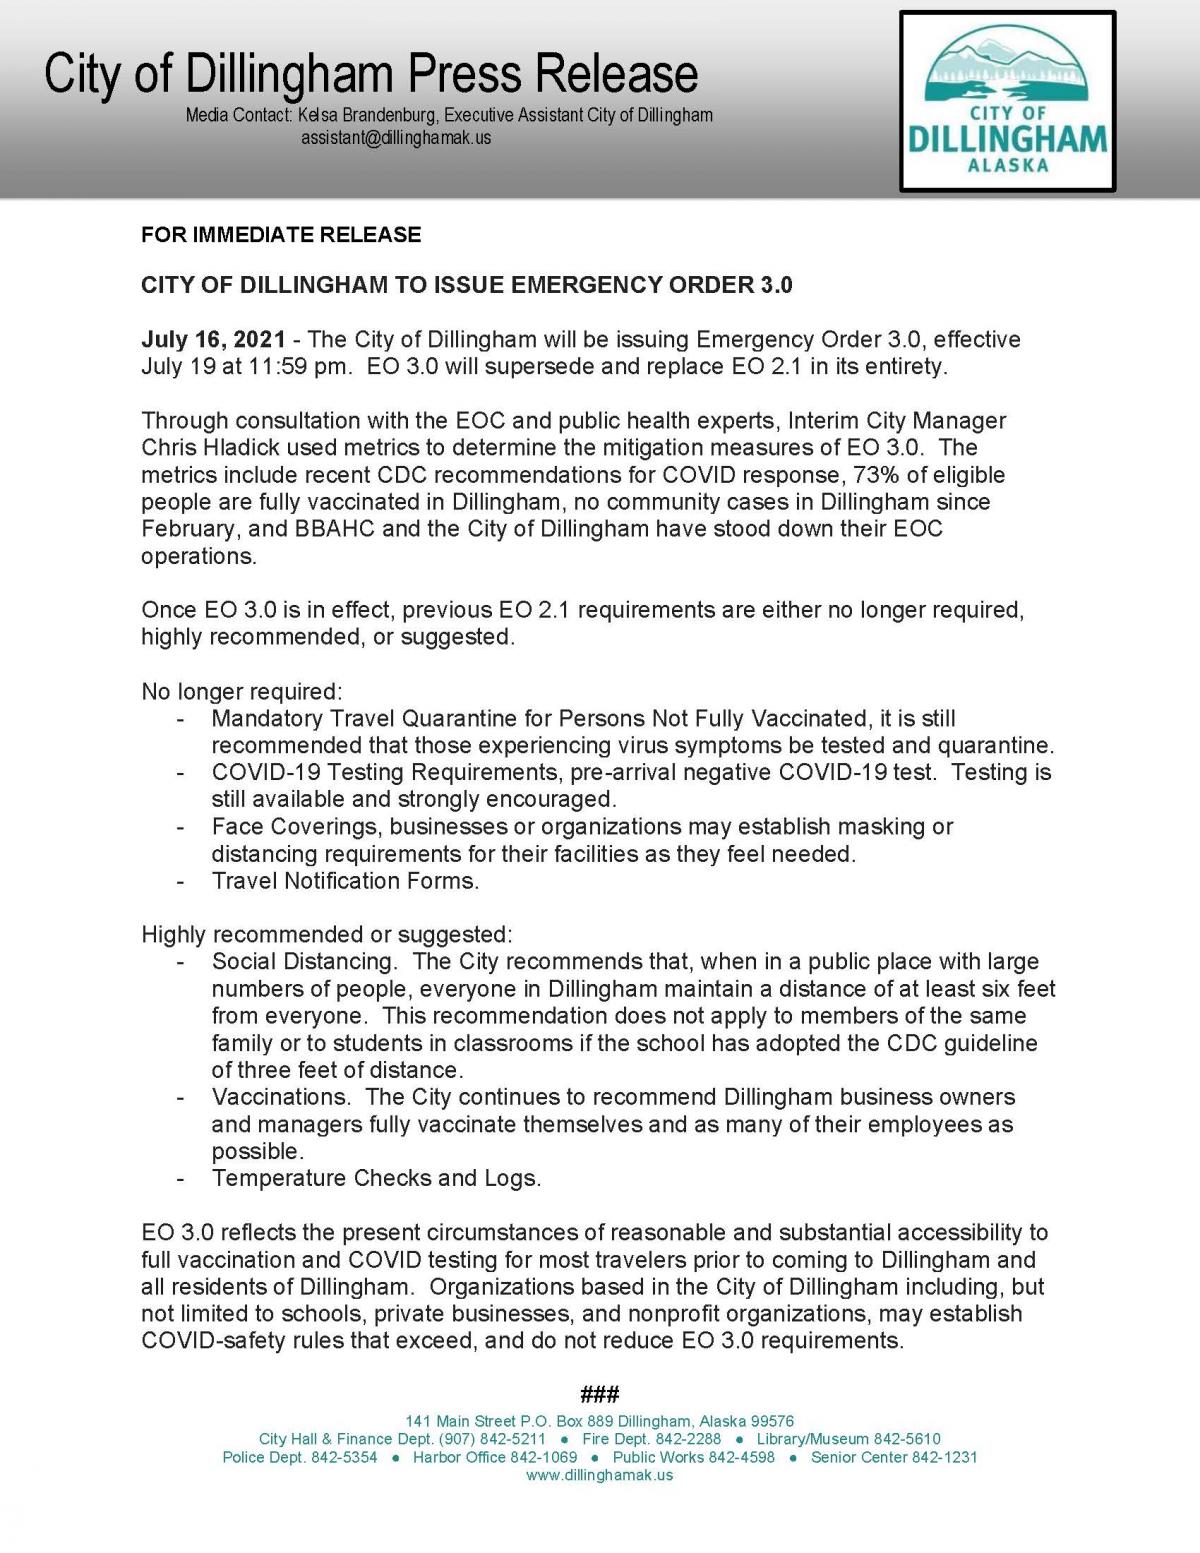 07.16.21 City of Dillingham Press Release - City of Dillingham to issue Emergency Order 3.0